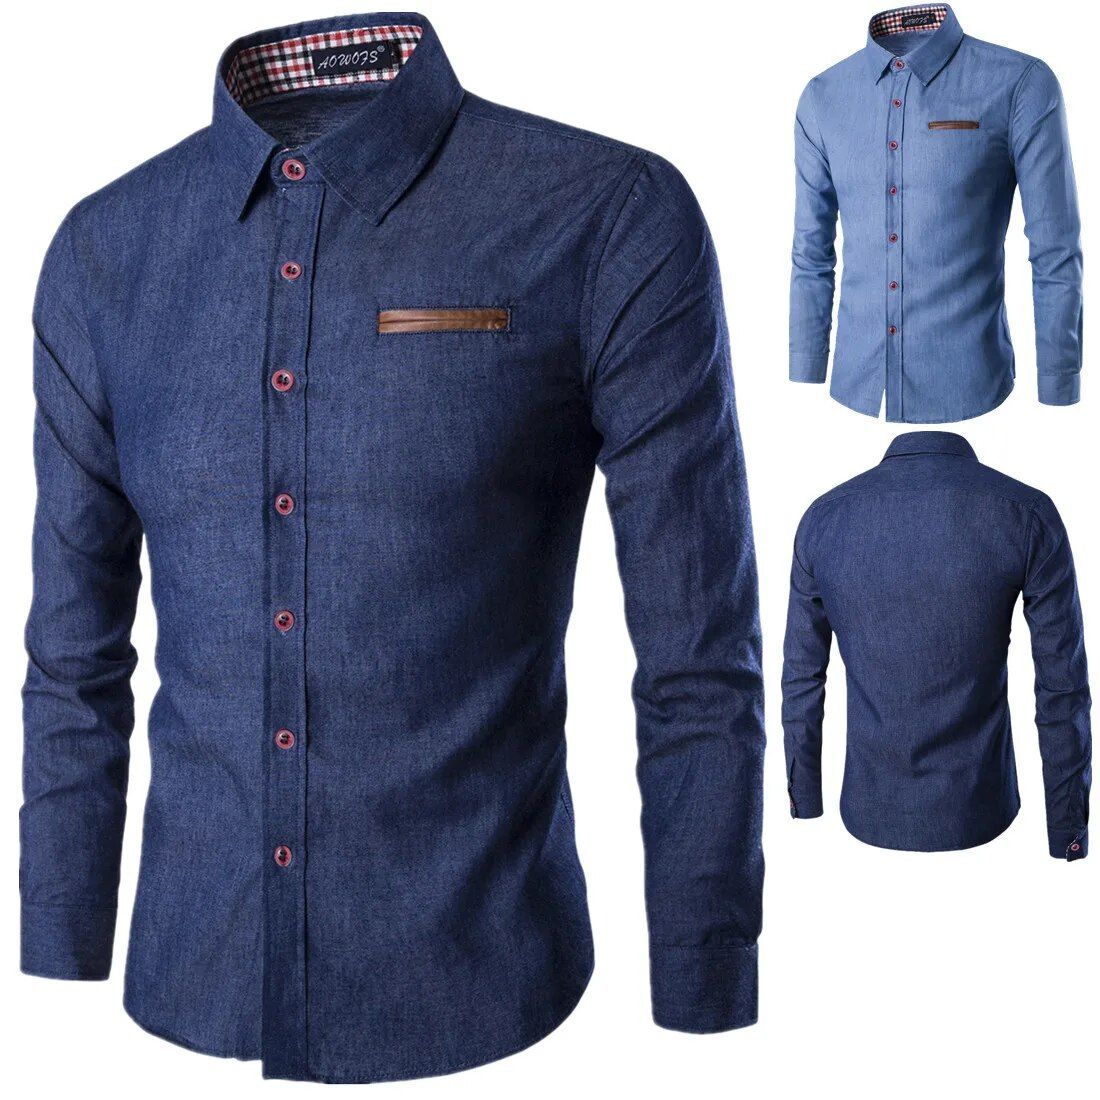 Casual denim shirt for men with solid color and plaid cuffs